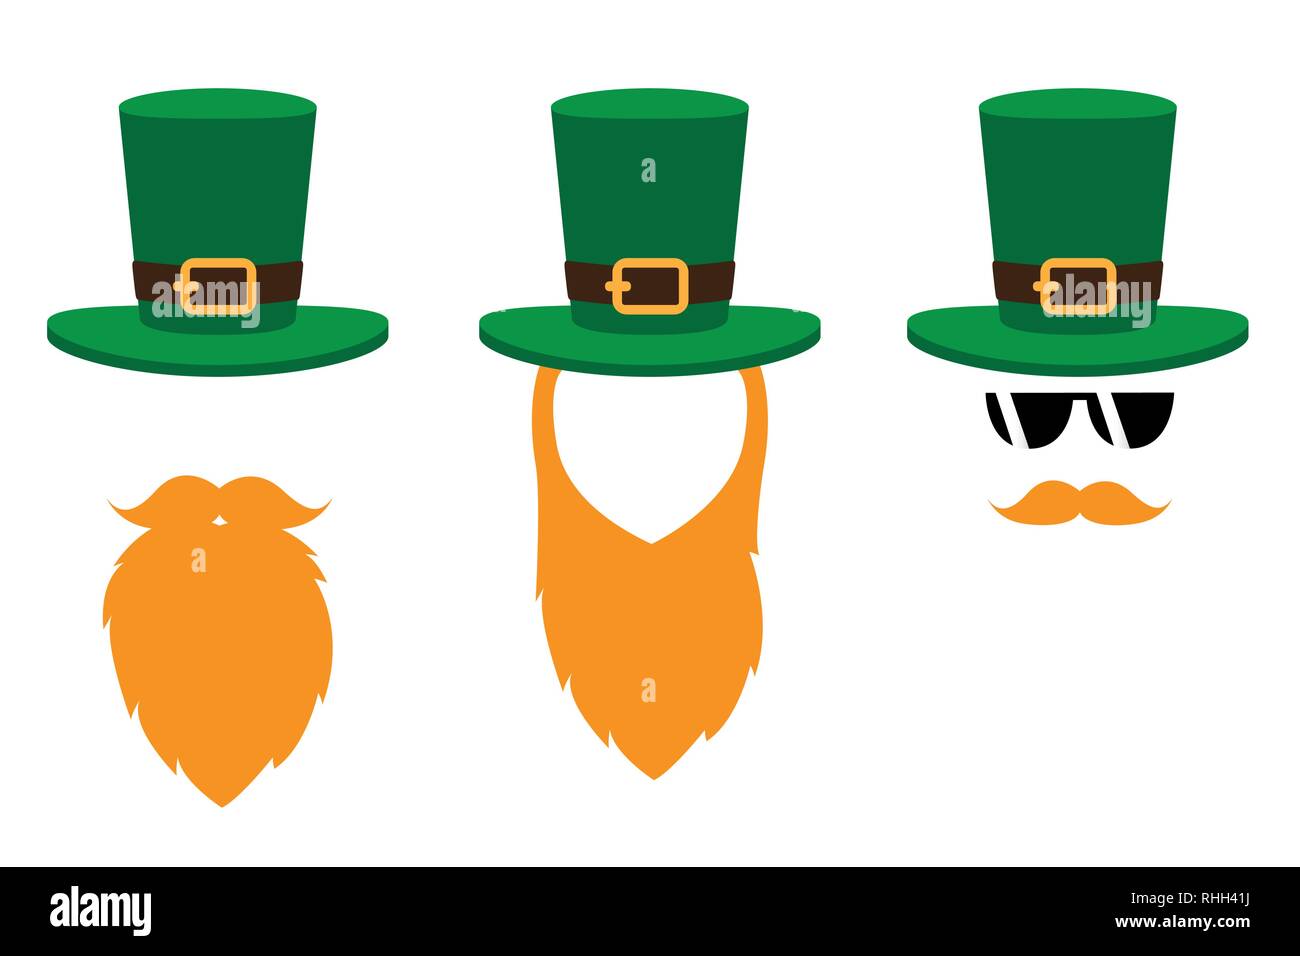 leprechaun character face with red beard and green hat set on white background vector illustration EPS10 Stock Vector